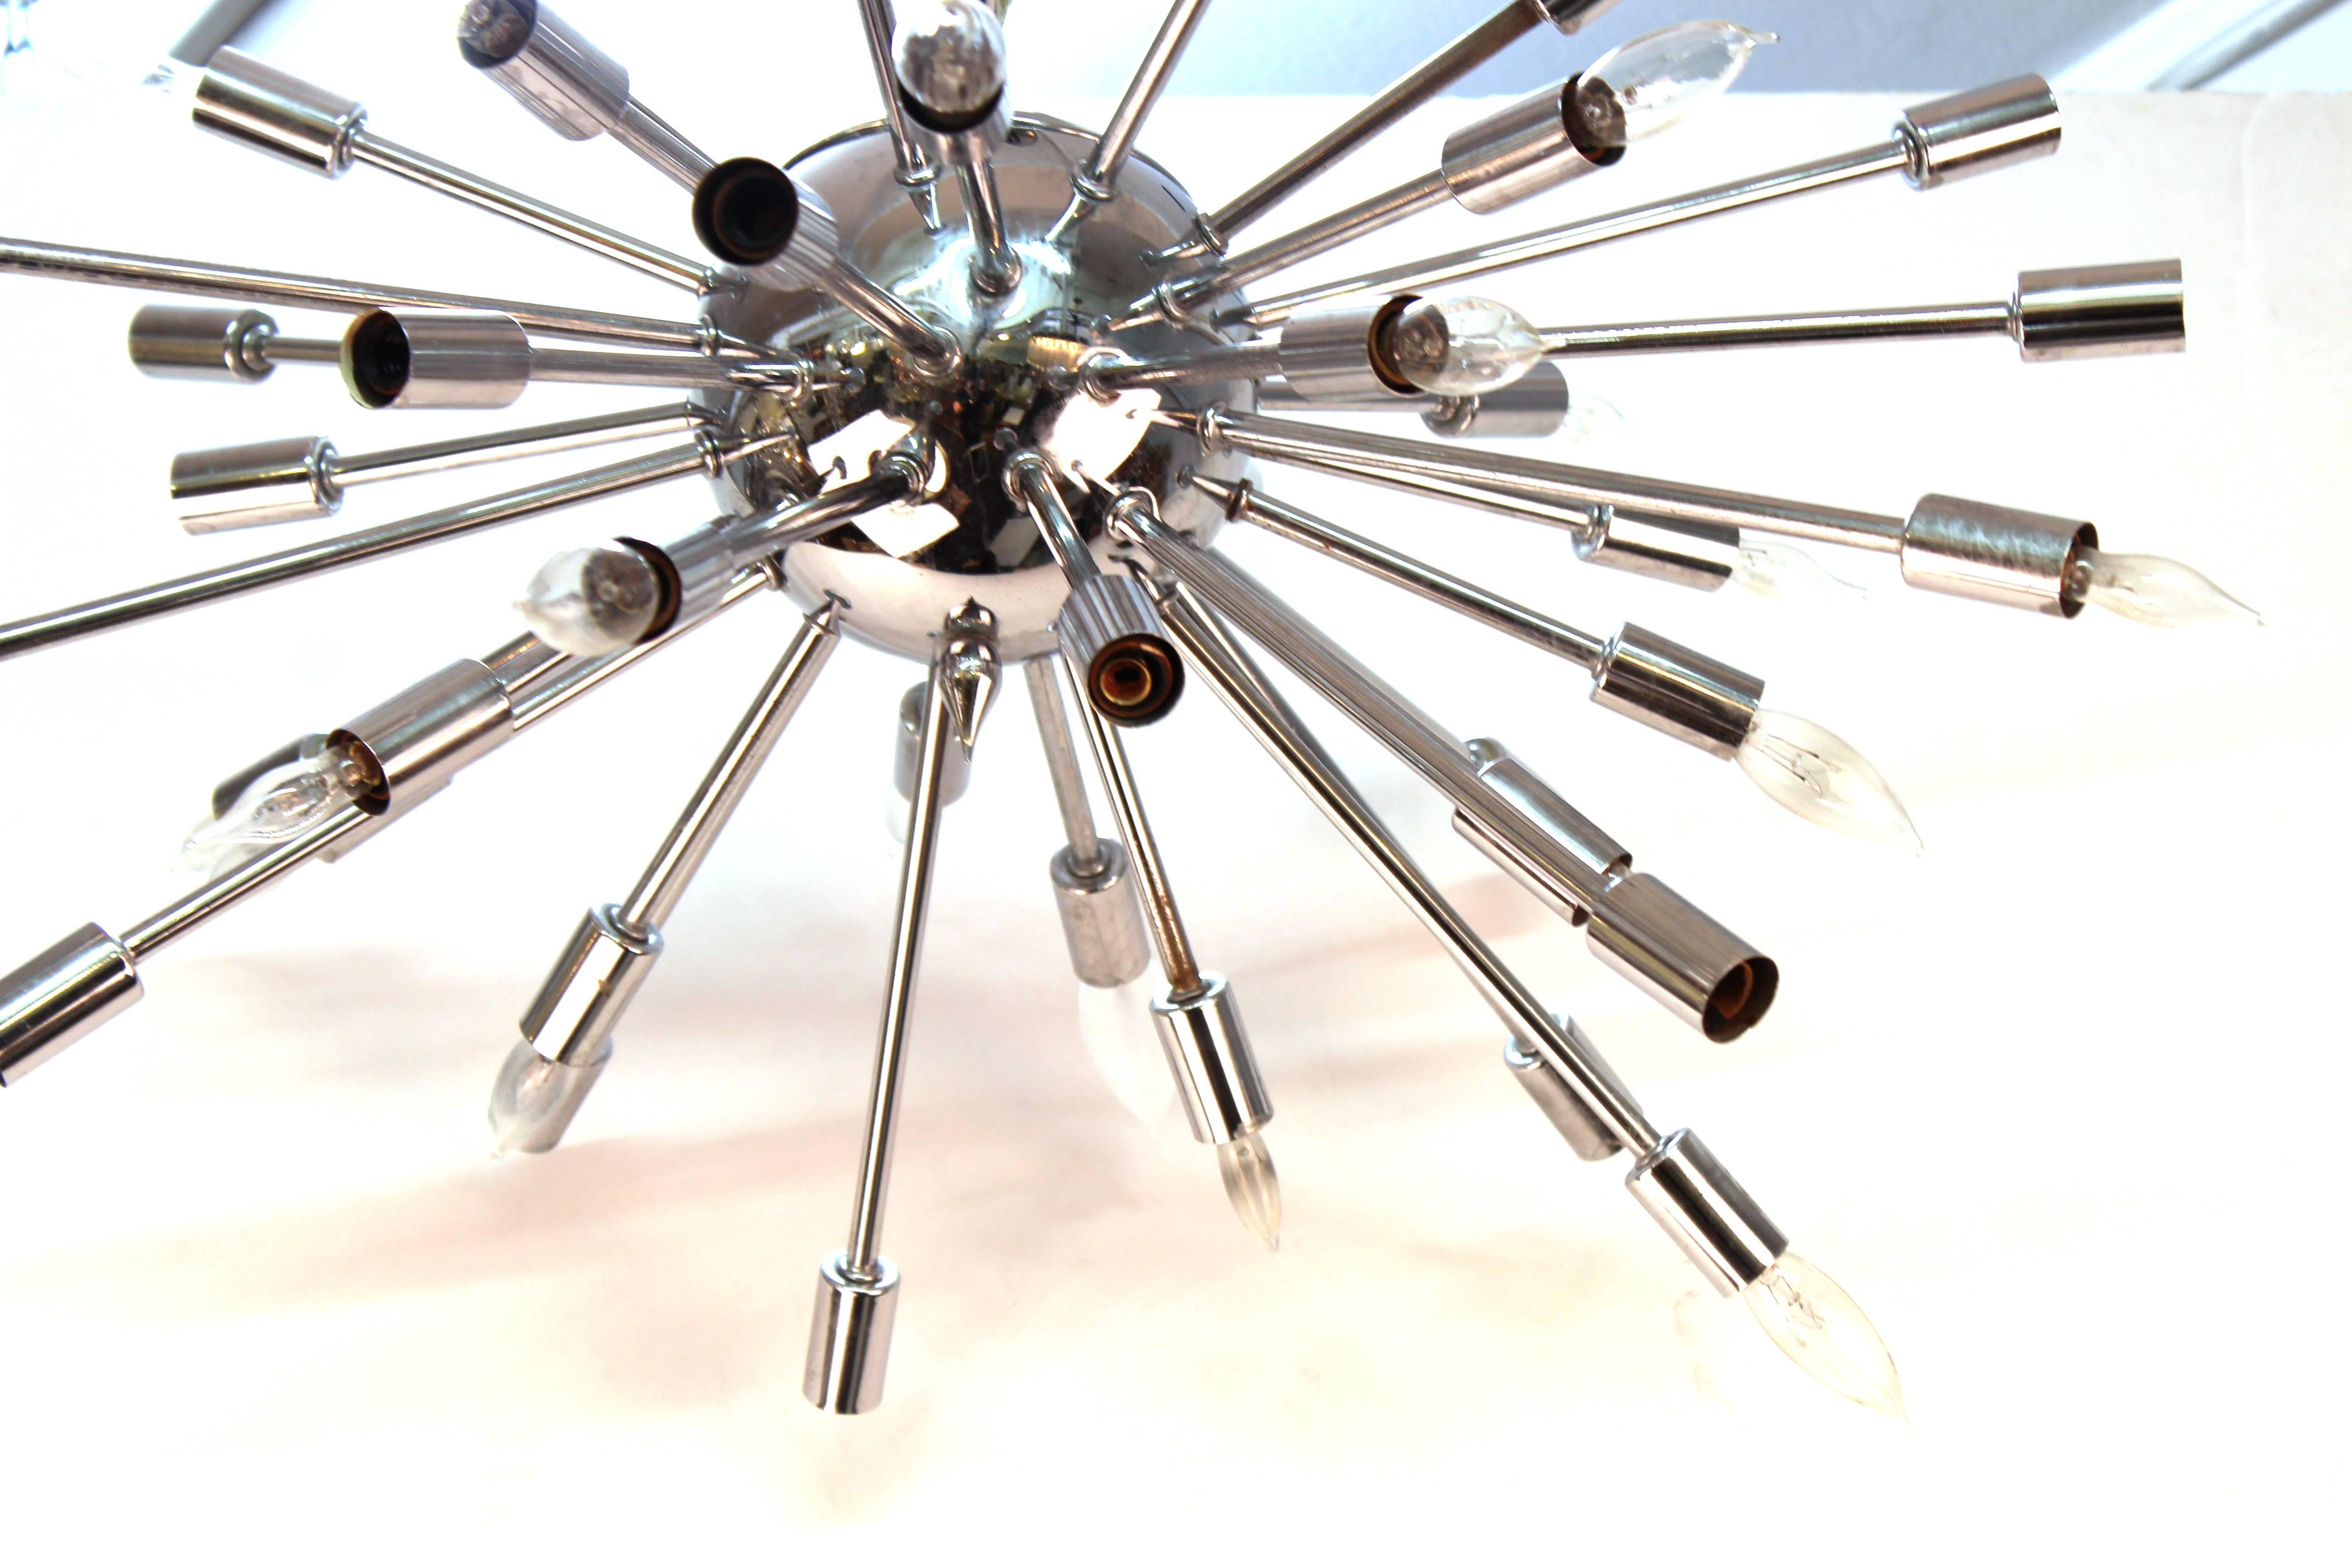 A Mid-Century Modern Sputnik chandelier in chrome, with a multitude of arms. The piece is in great vintage condition with age-appropriate use.